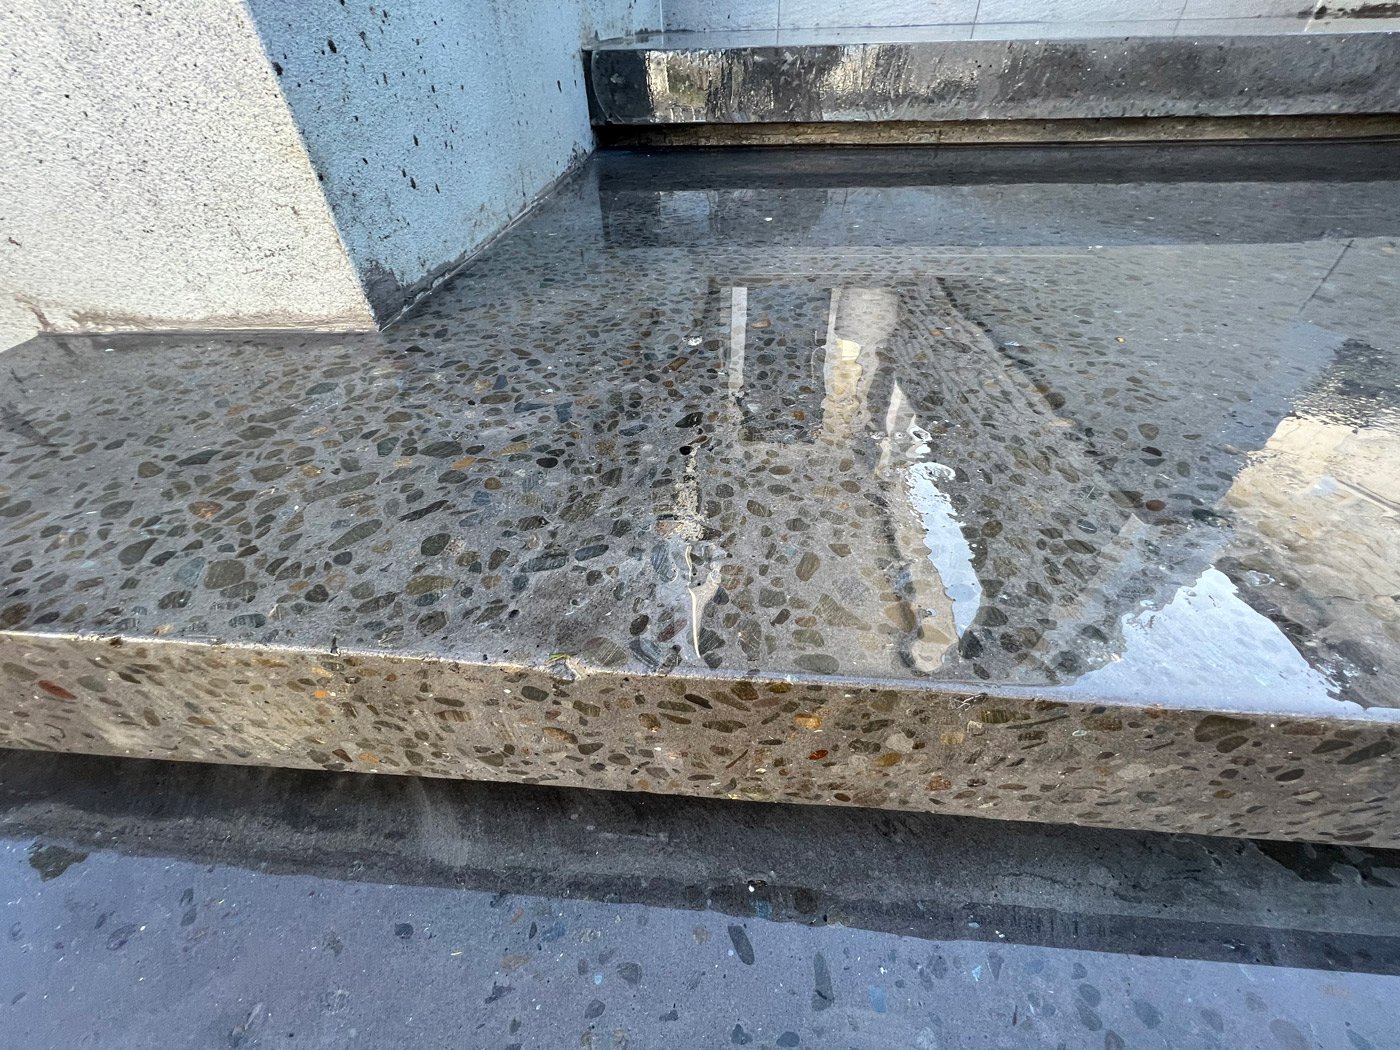 Close up of a wet freshly cleaned concrete step